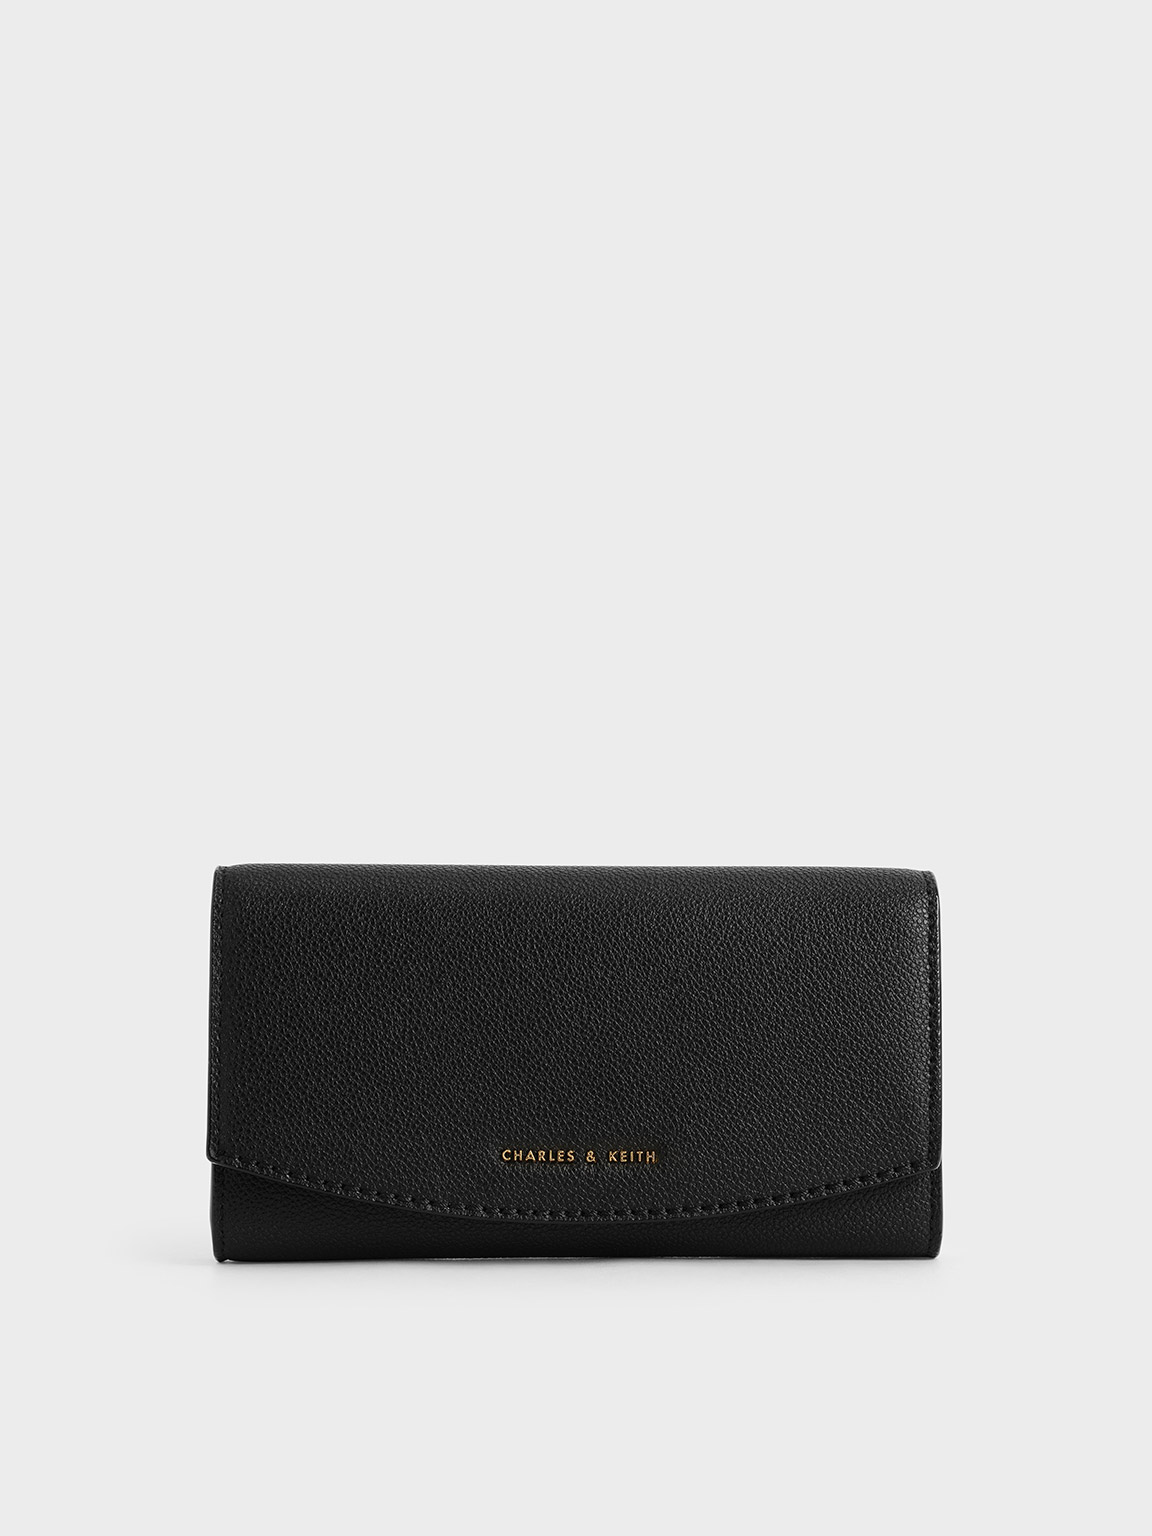 Charles & Keith Wallets for Women